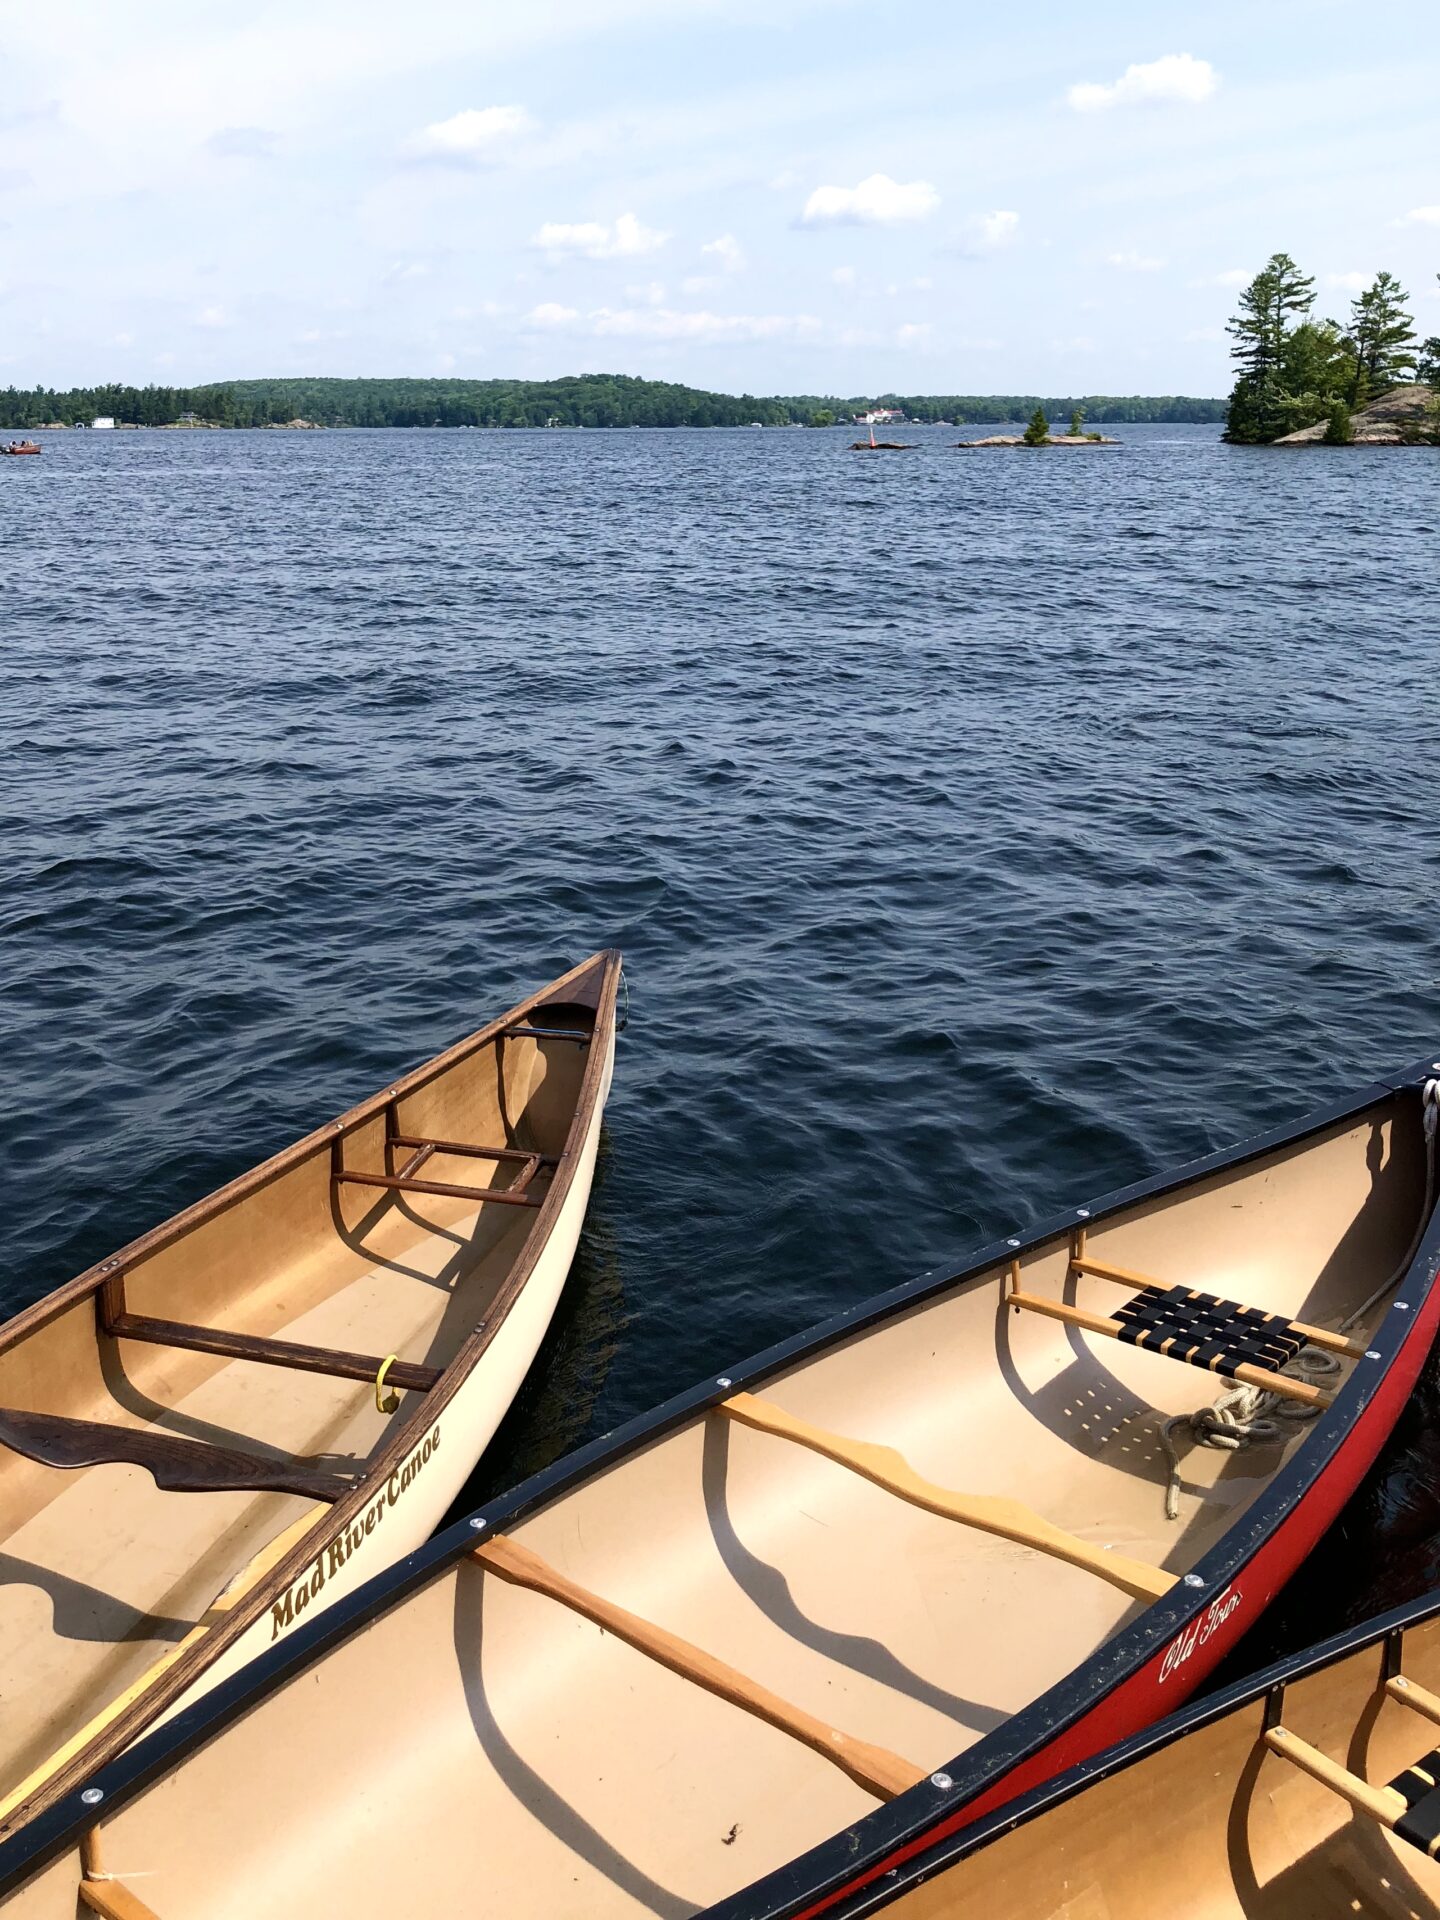 Canoes on a Canadian Lake